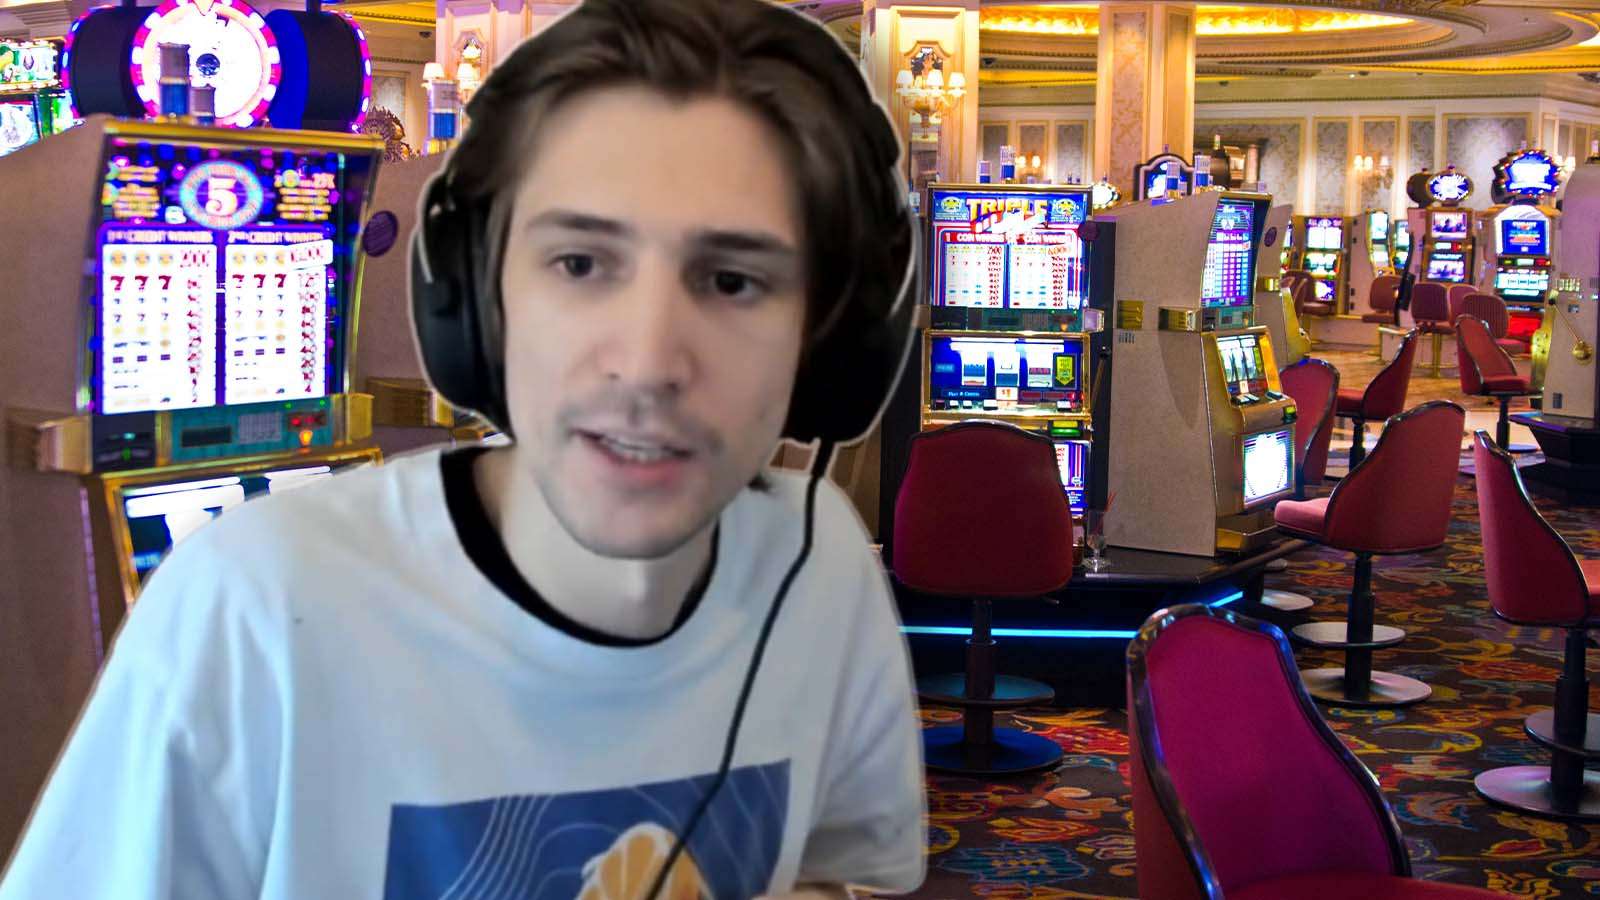 xQc calls out “hypocrites” who upload clips from Twitch gambling streams